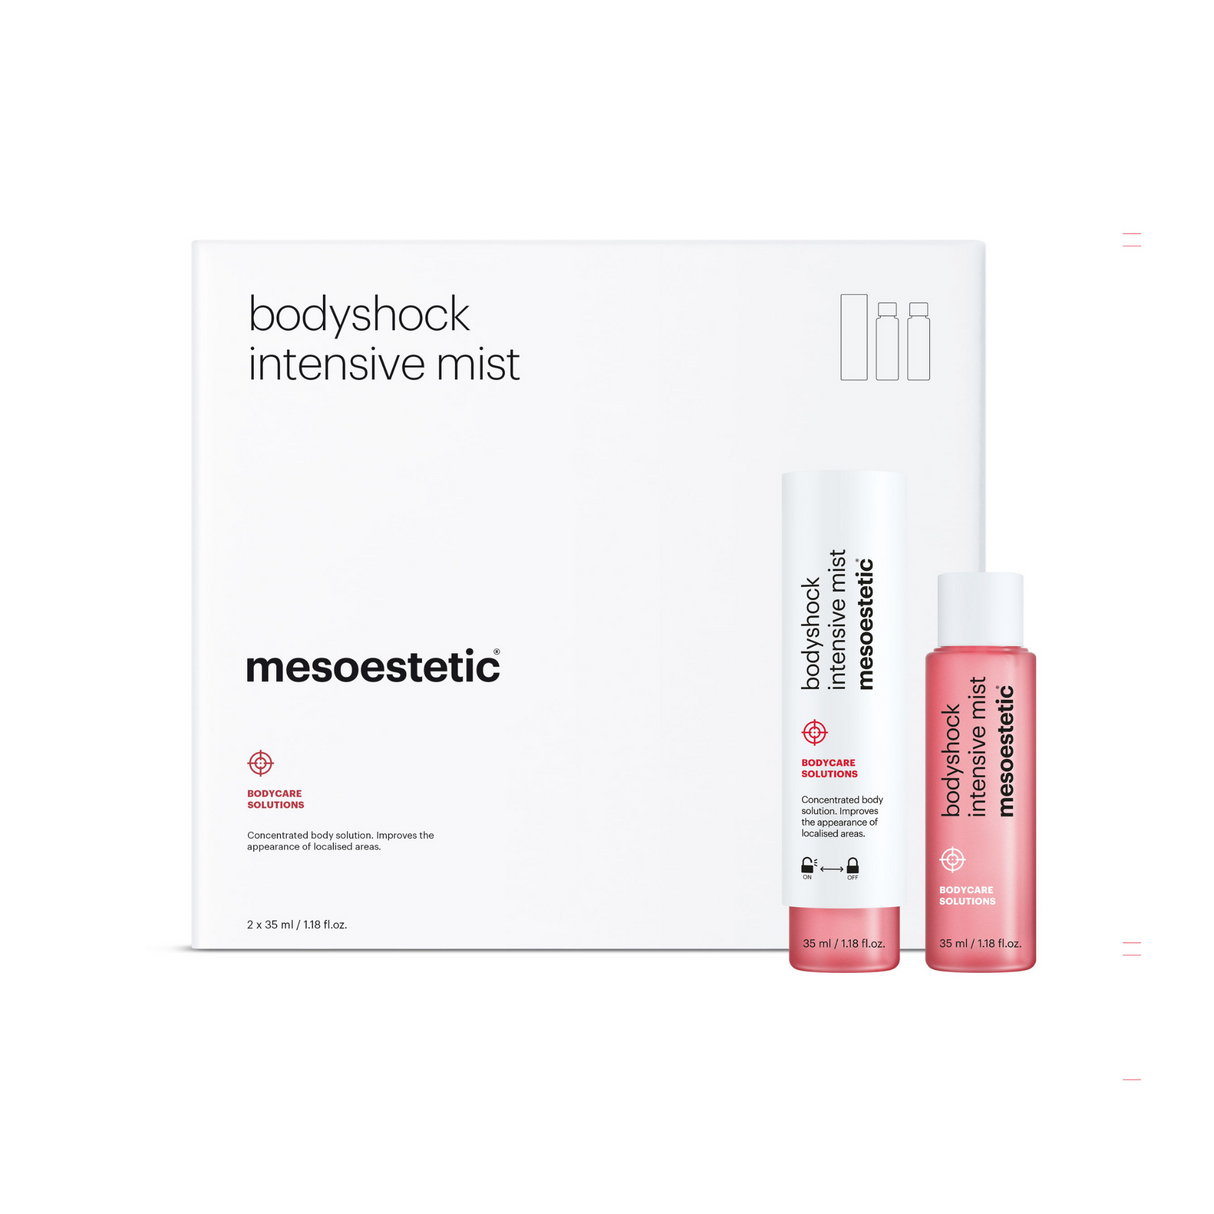 bodyshock intensive mist | For local fat reduction | 2x35ml